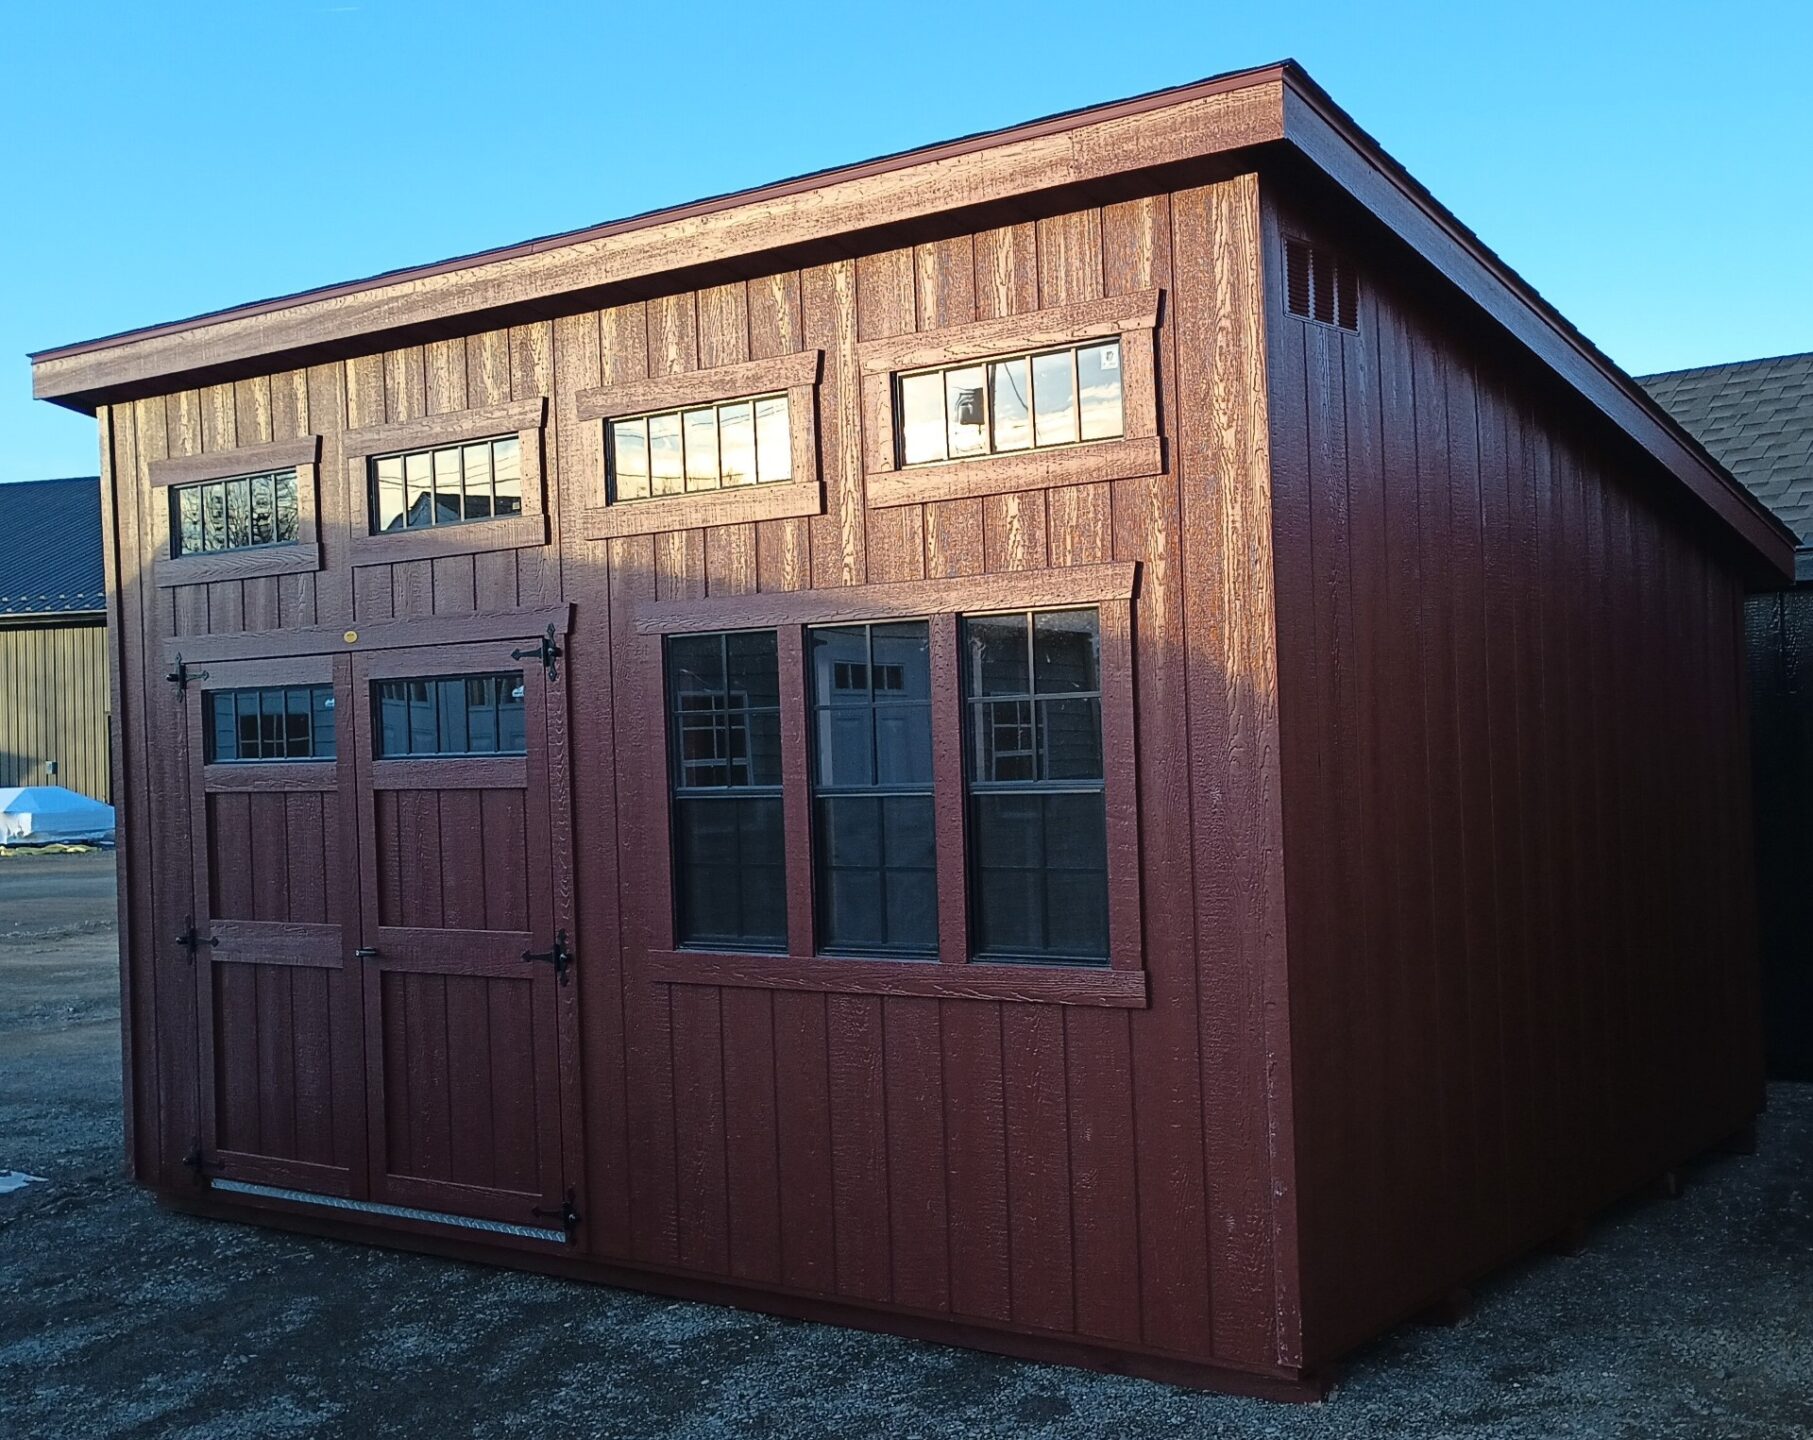 Red one slant shed with three windows, transom windows and double doors with transom windows